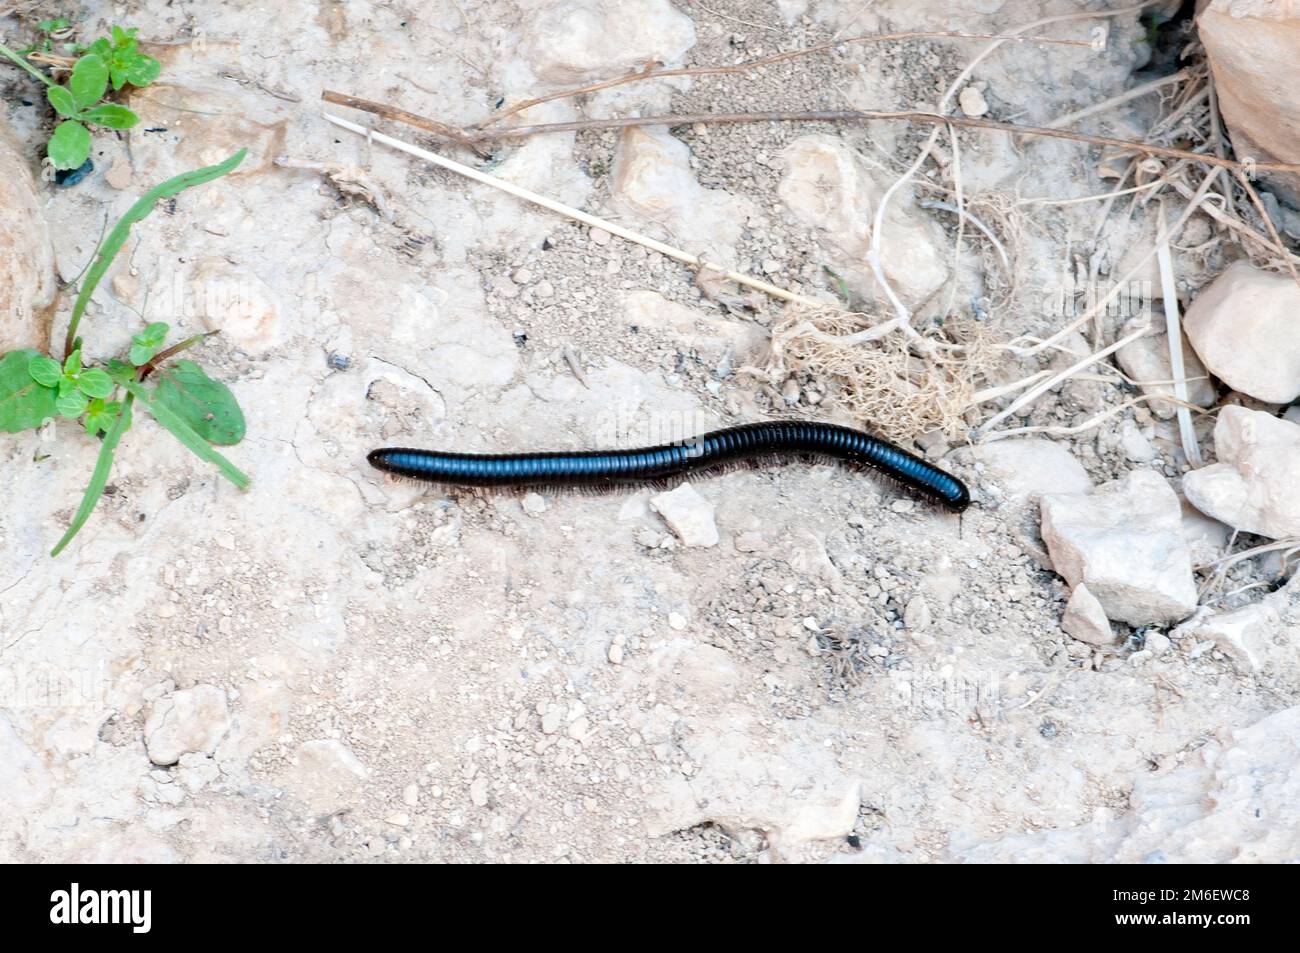 centipede in the Negev Desert, Israel near the town of Yeruham Photographed in November Stock Photo